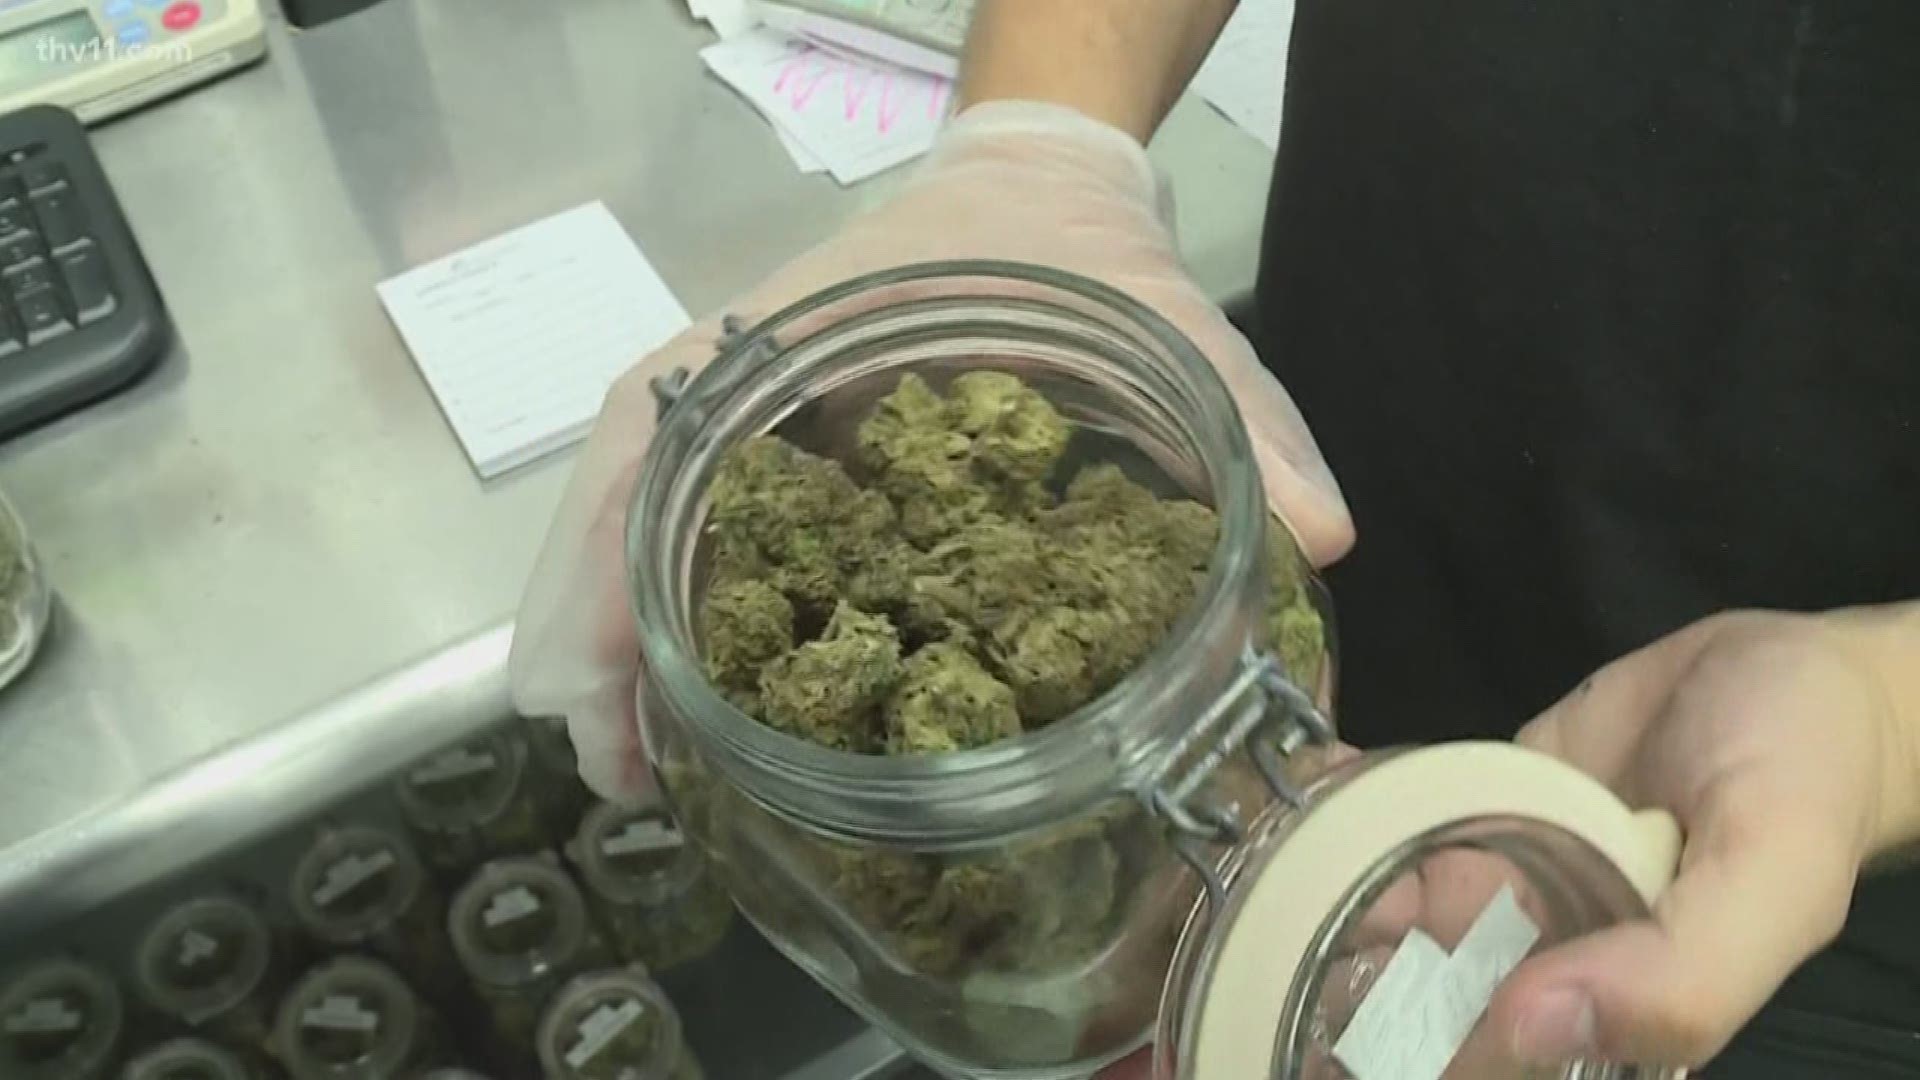 The Arkansas Medical Marijuana Commission approved dispensary scores Wednesday and the top 32 companies will be awarded licenses.